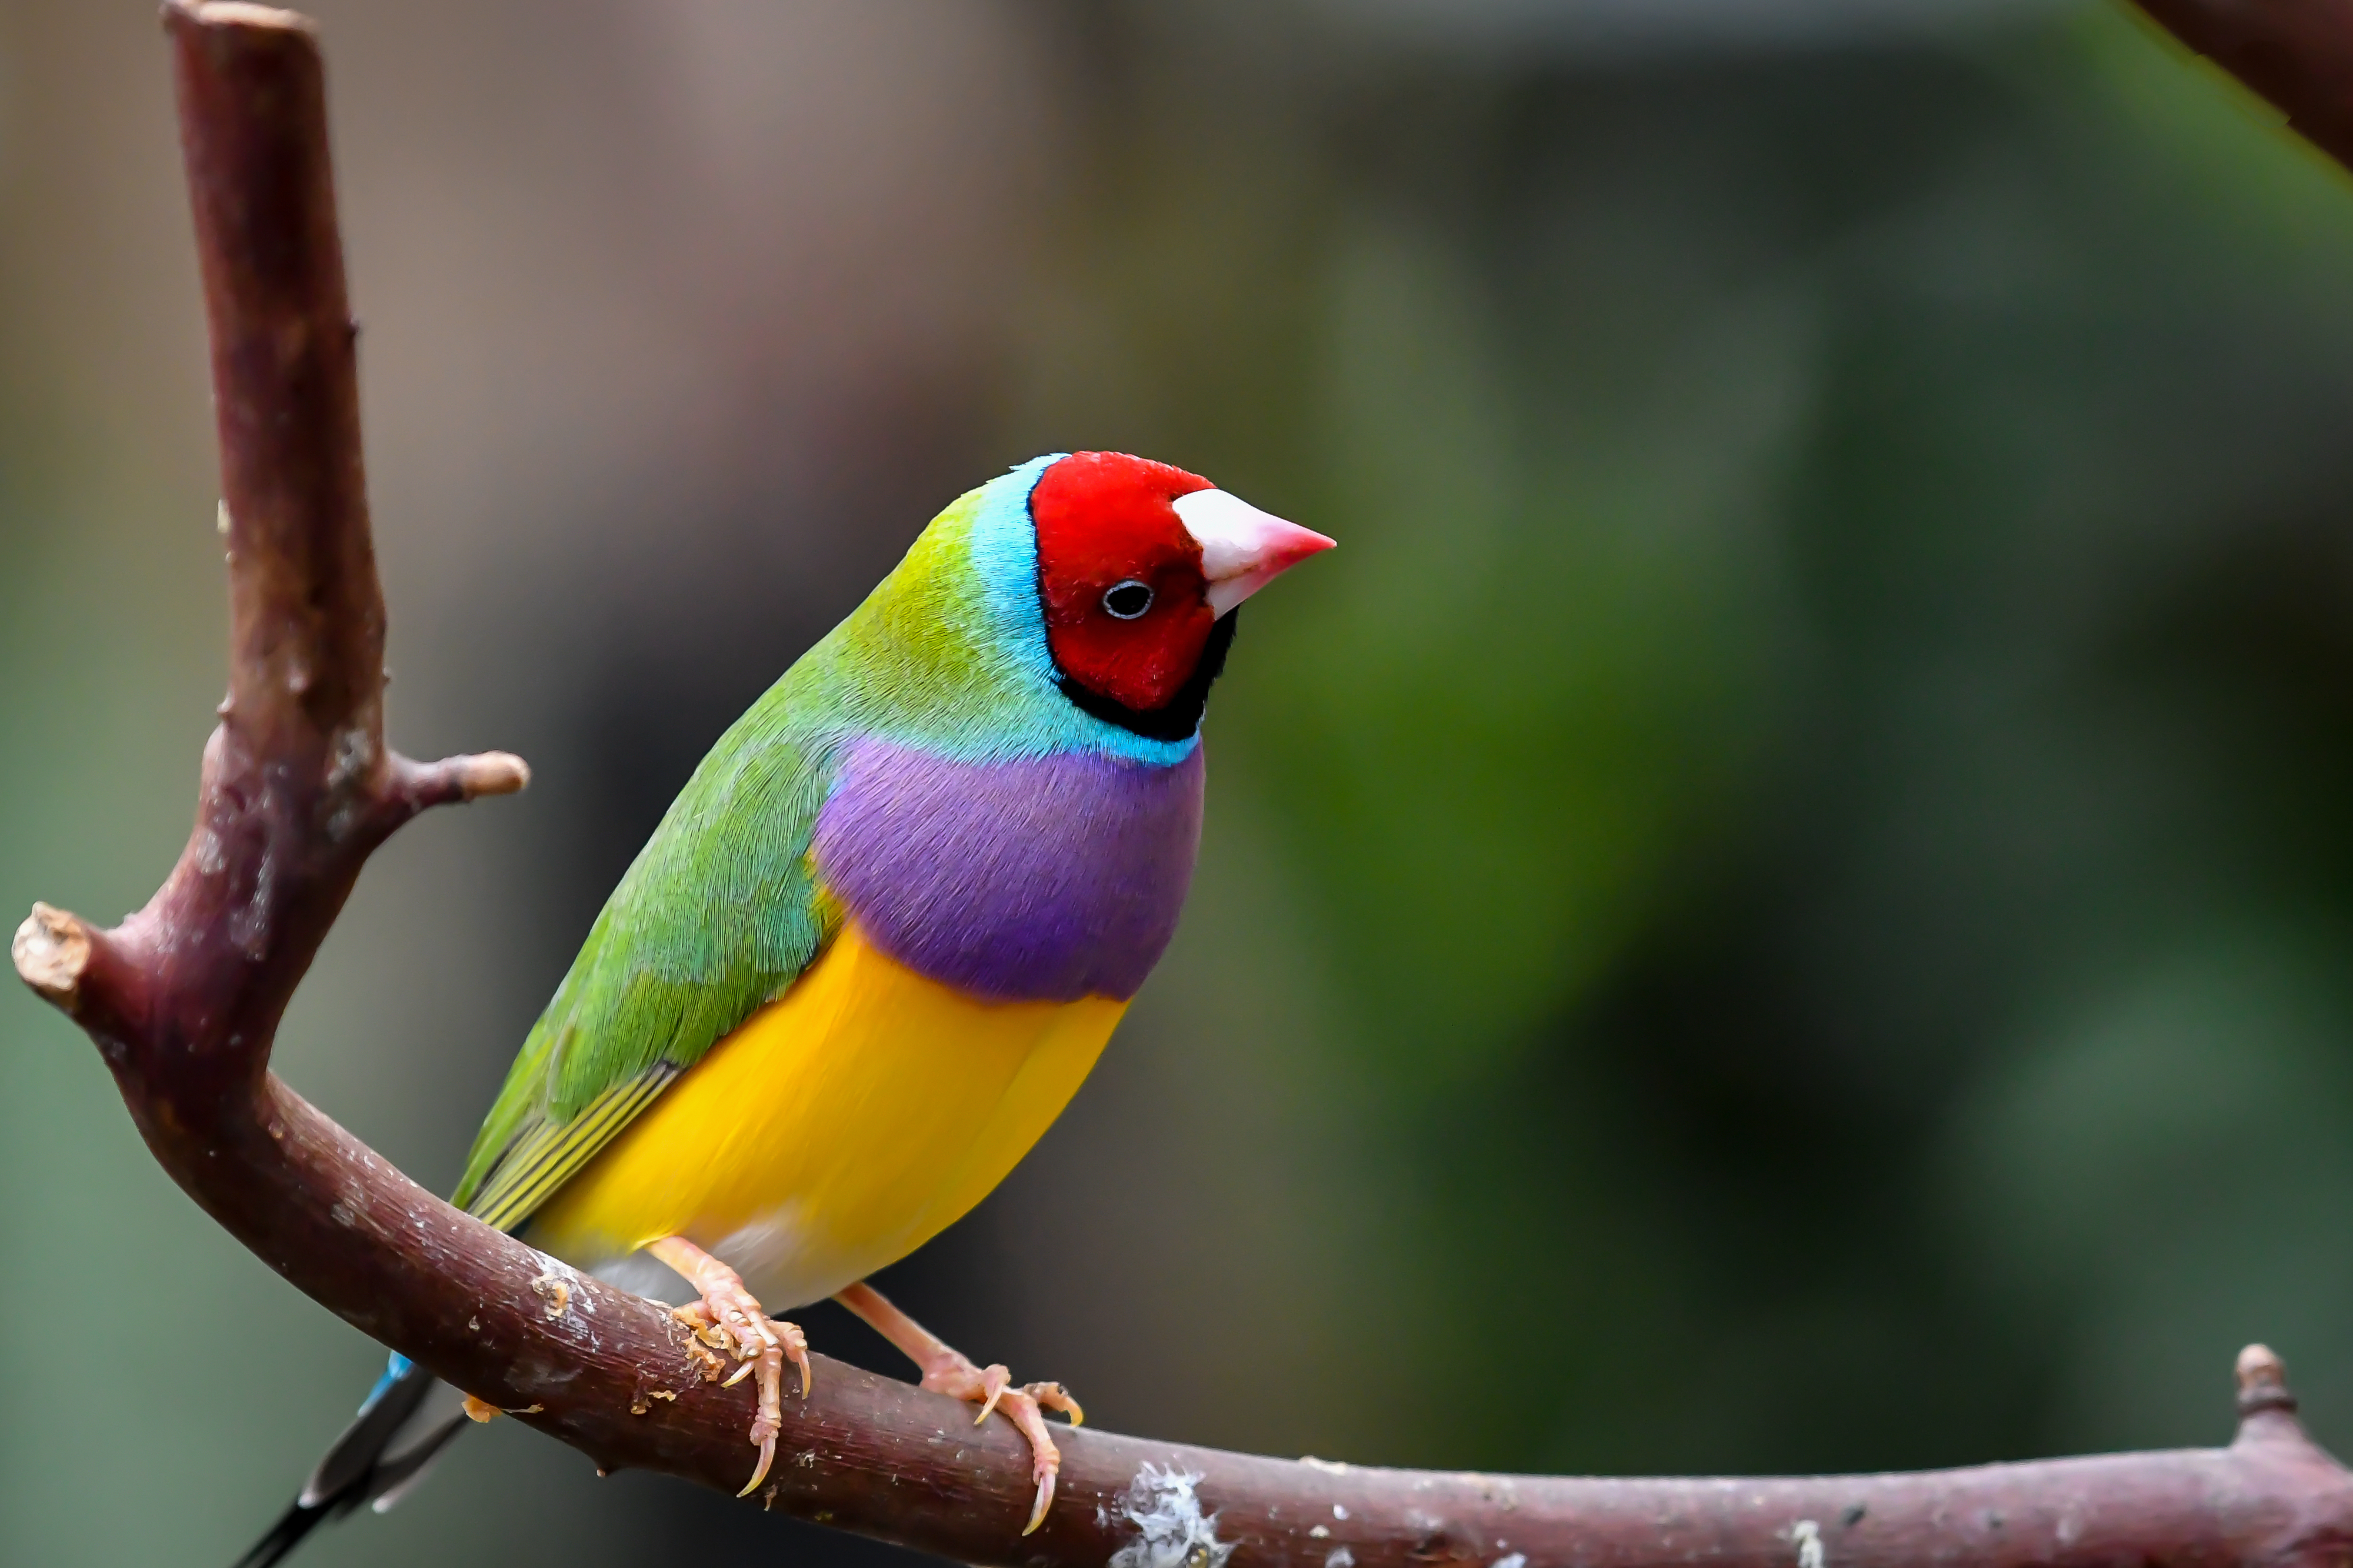 A brightly colored Gouldian finch perches on a branch, showcasing its vibrant feathers